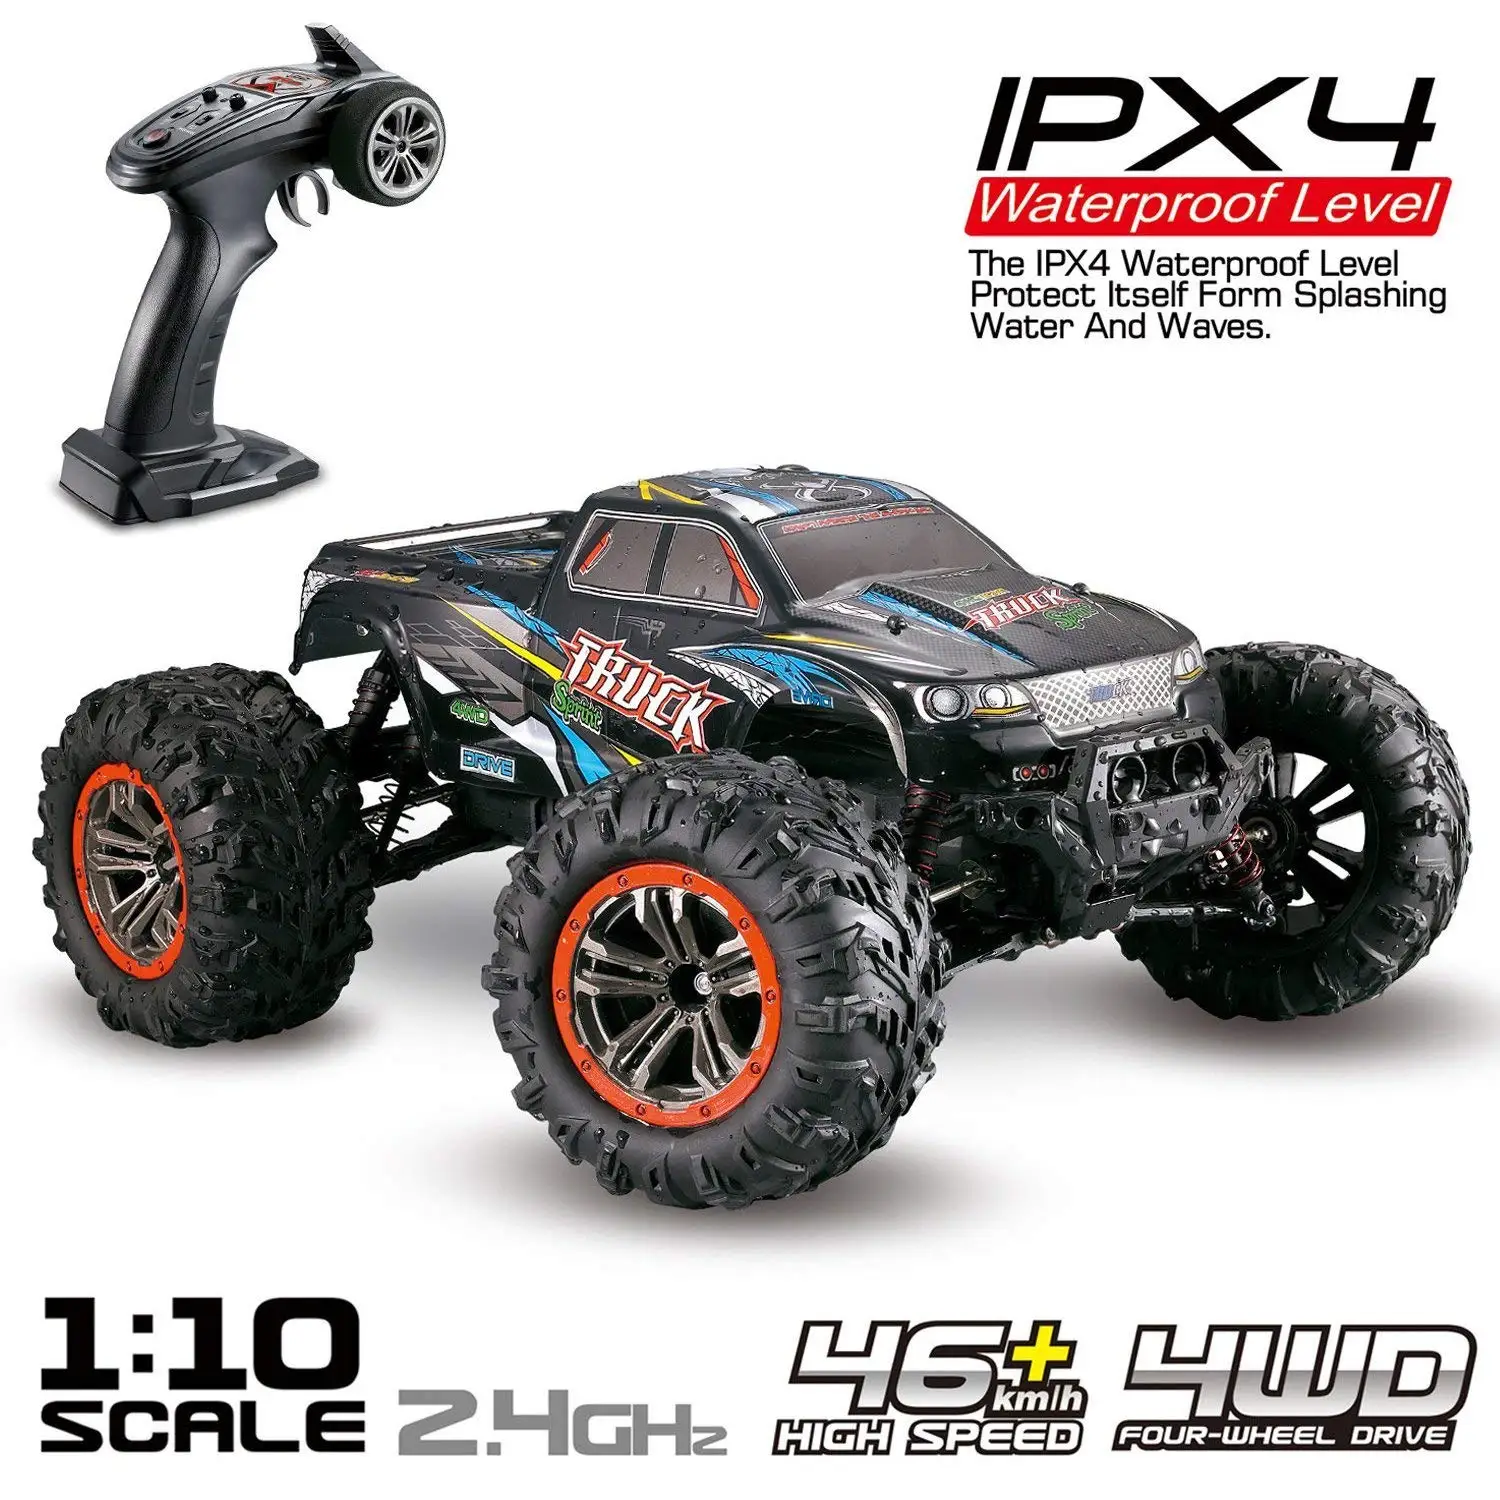 Baztoy 9920C 1/24 Scale 4WD Remote Control Car for sale online 